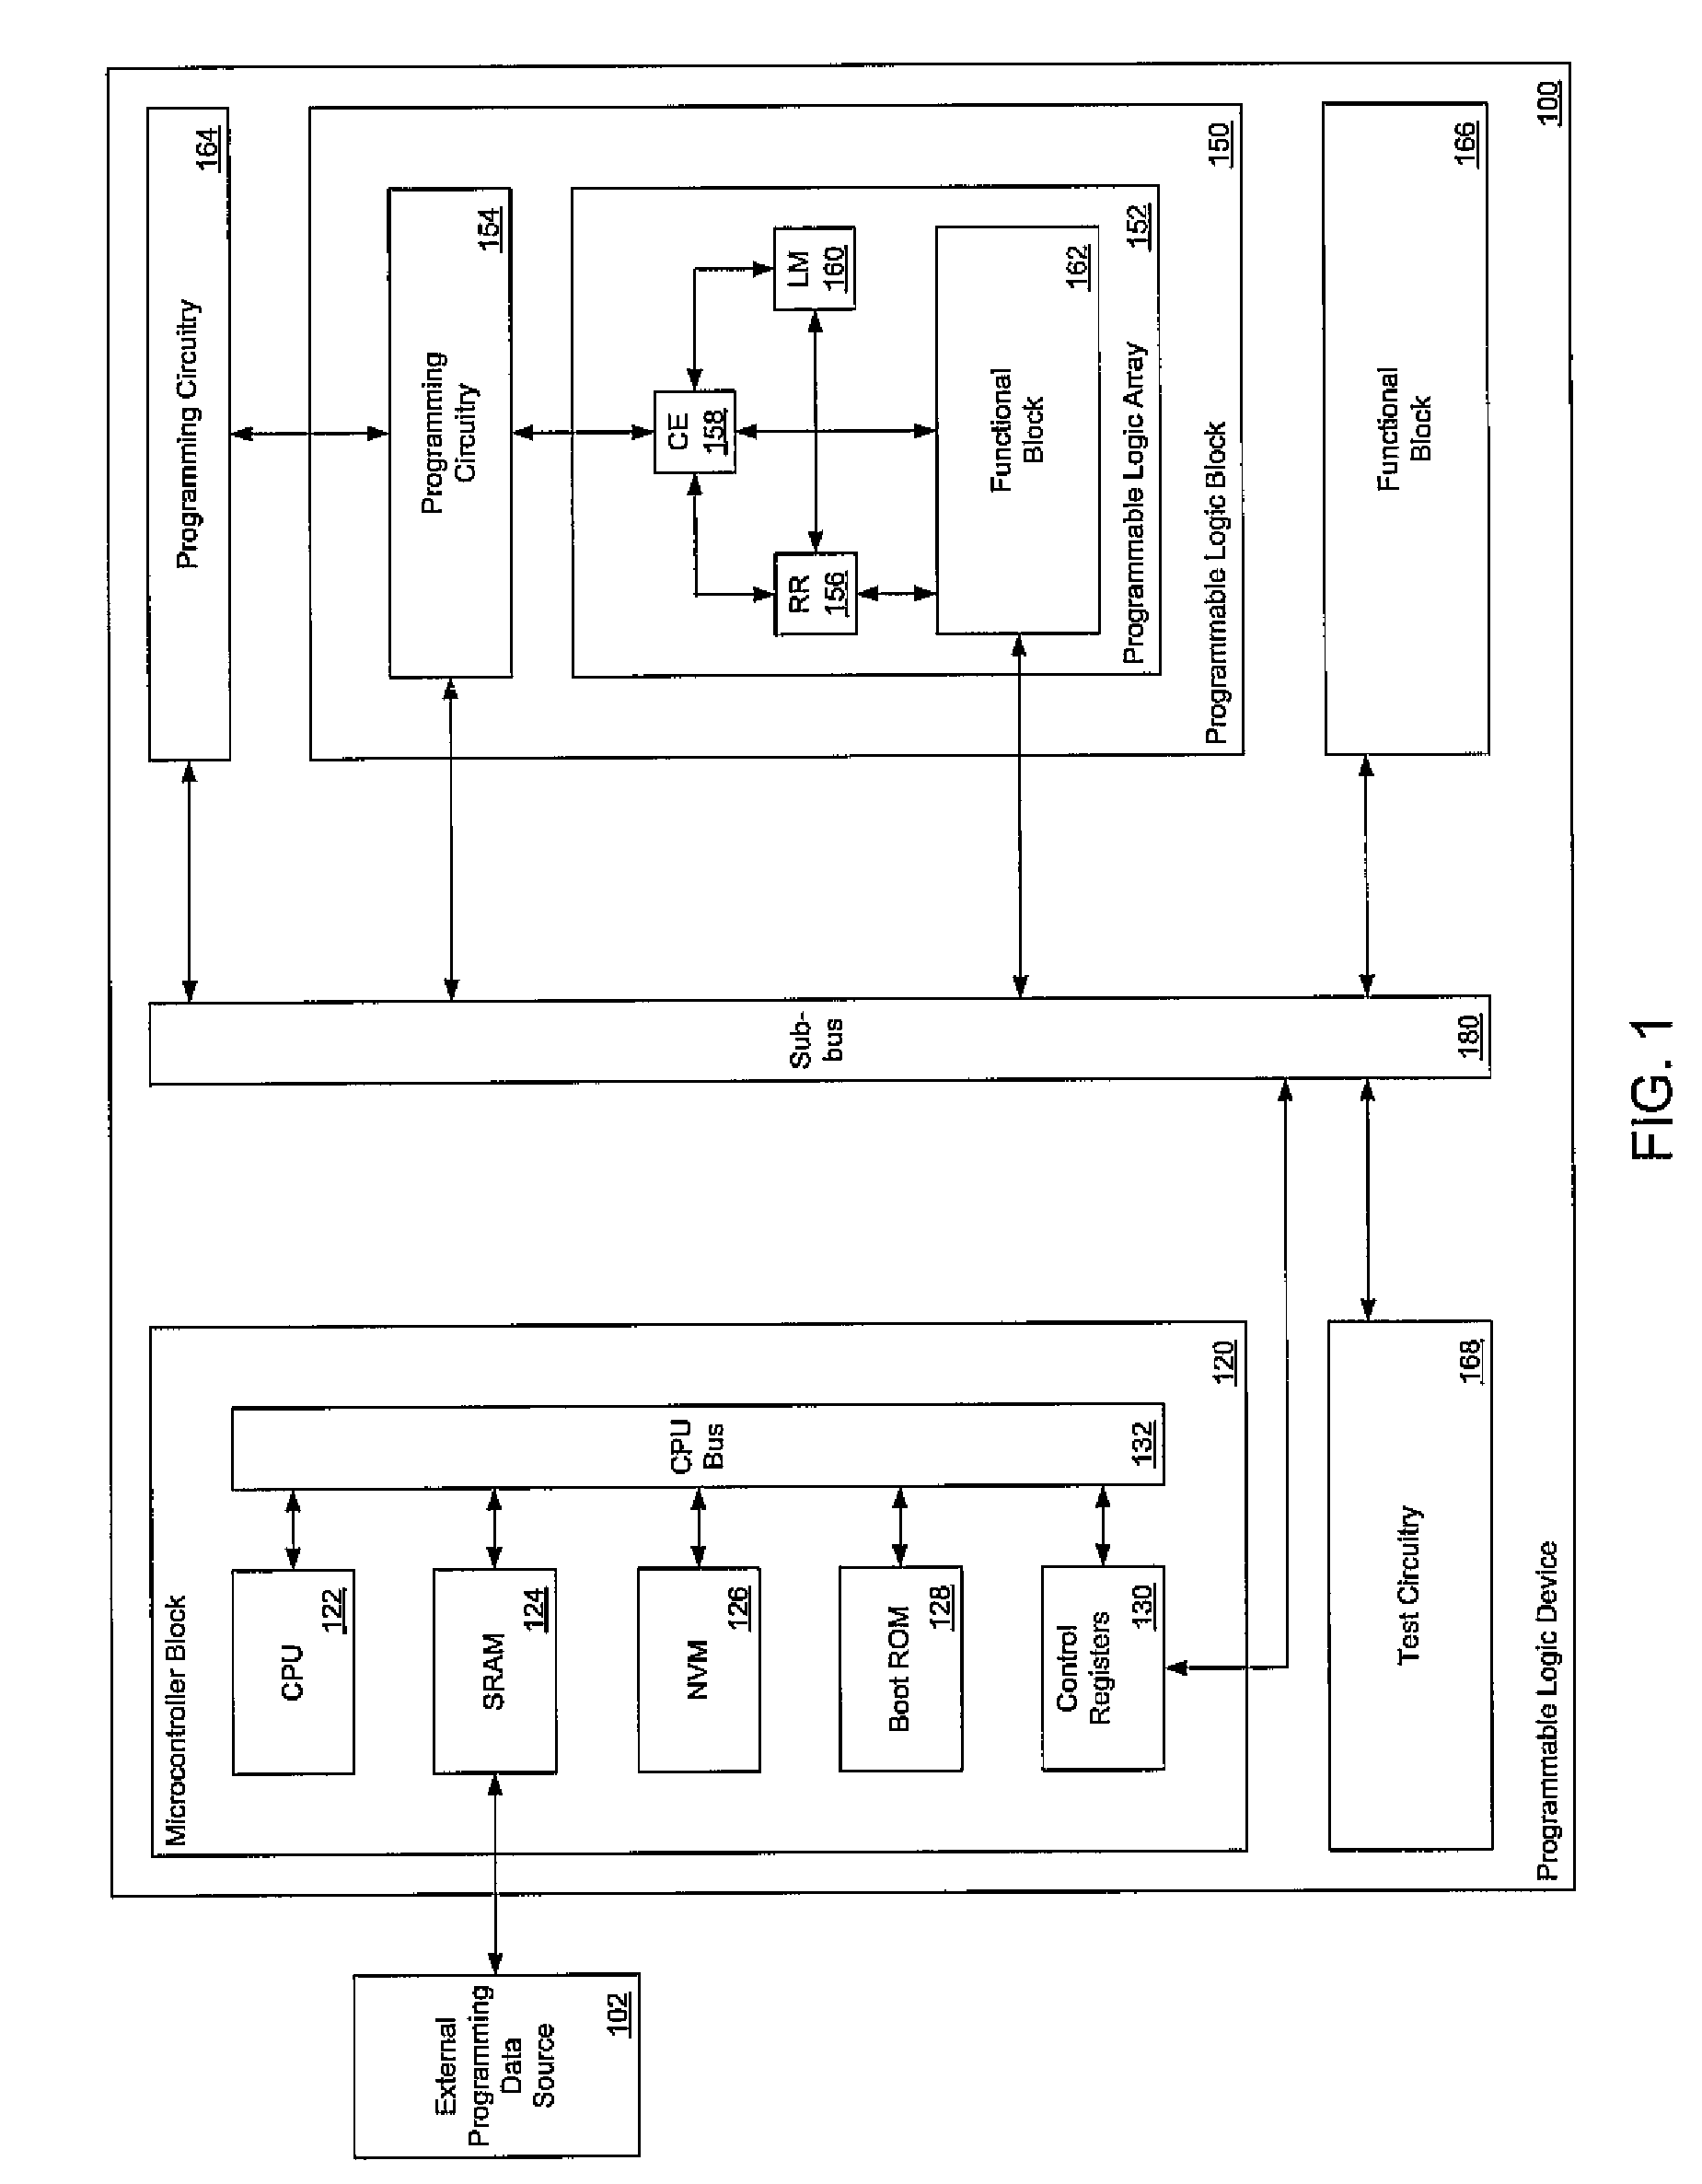 Programmable logic device with a microcontroller-based control system